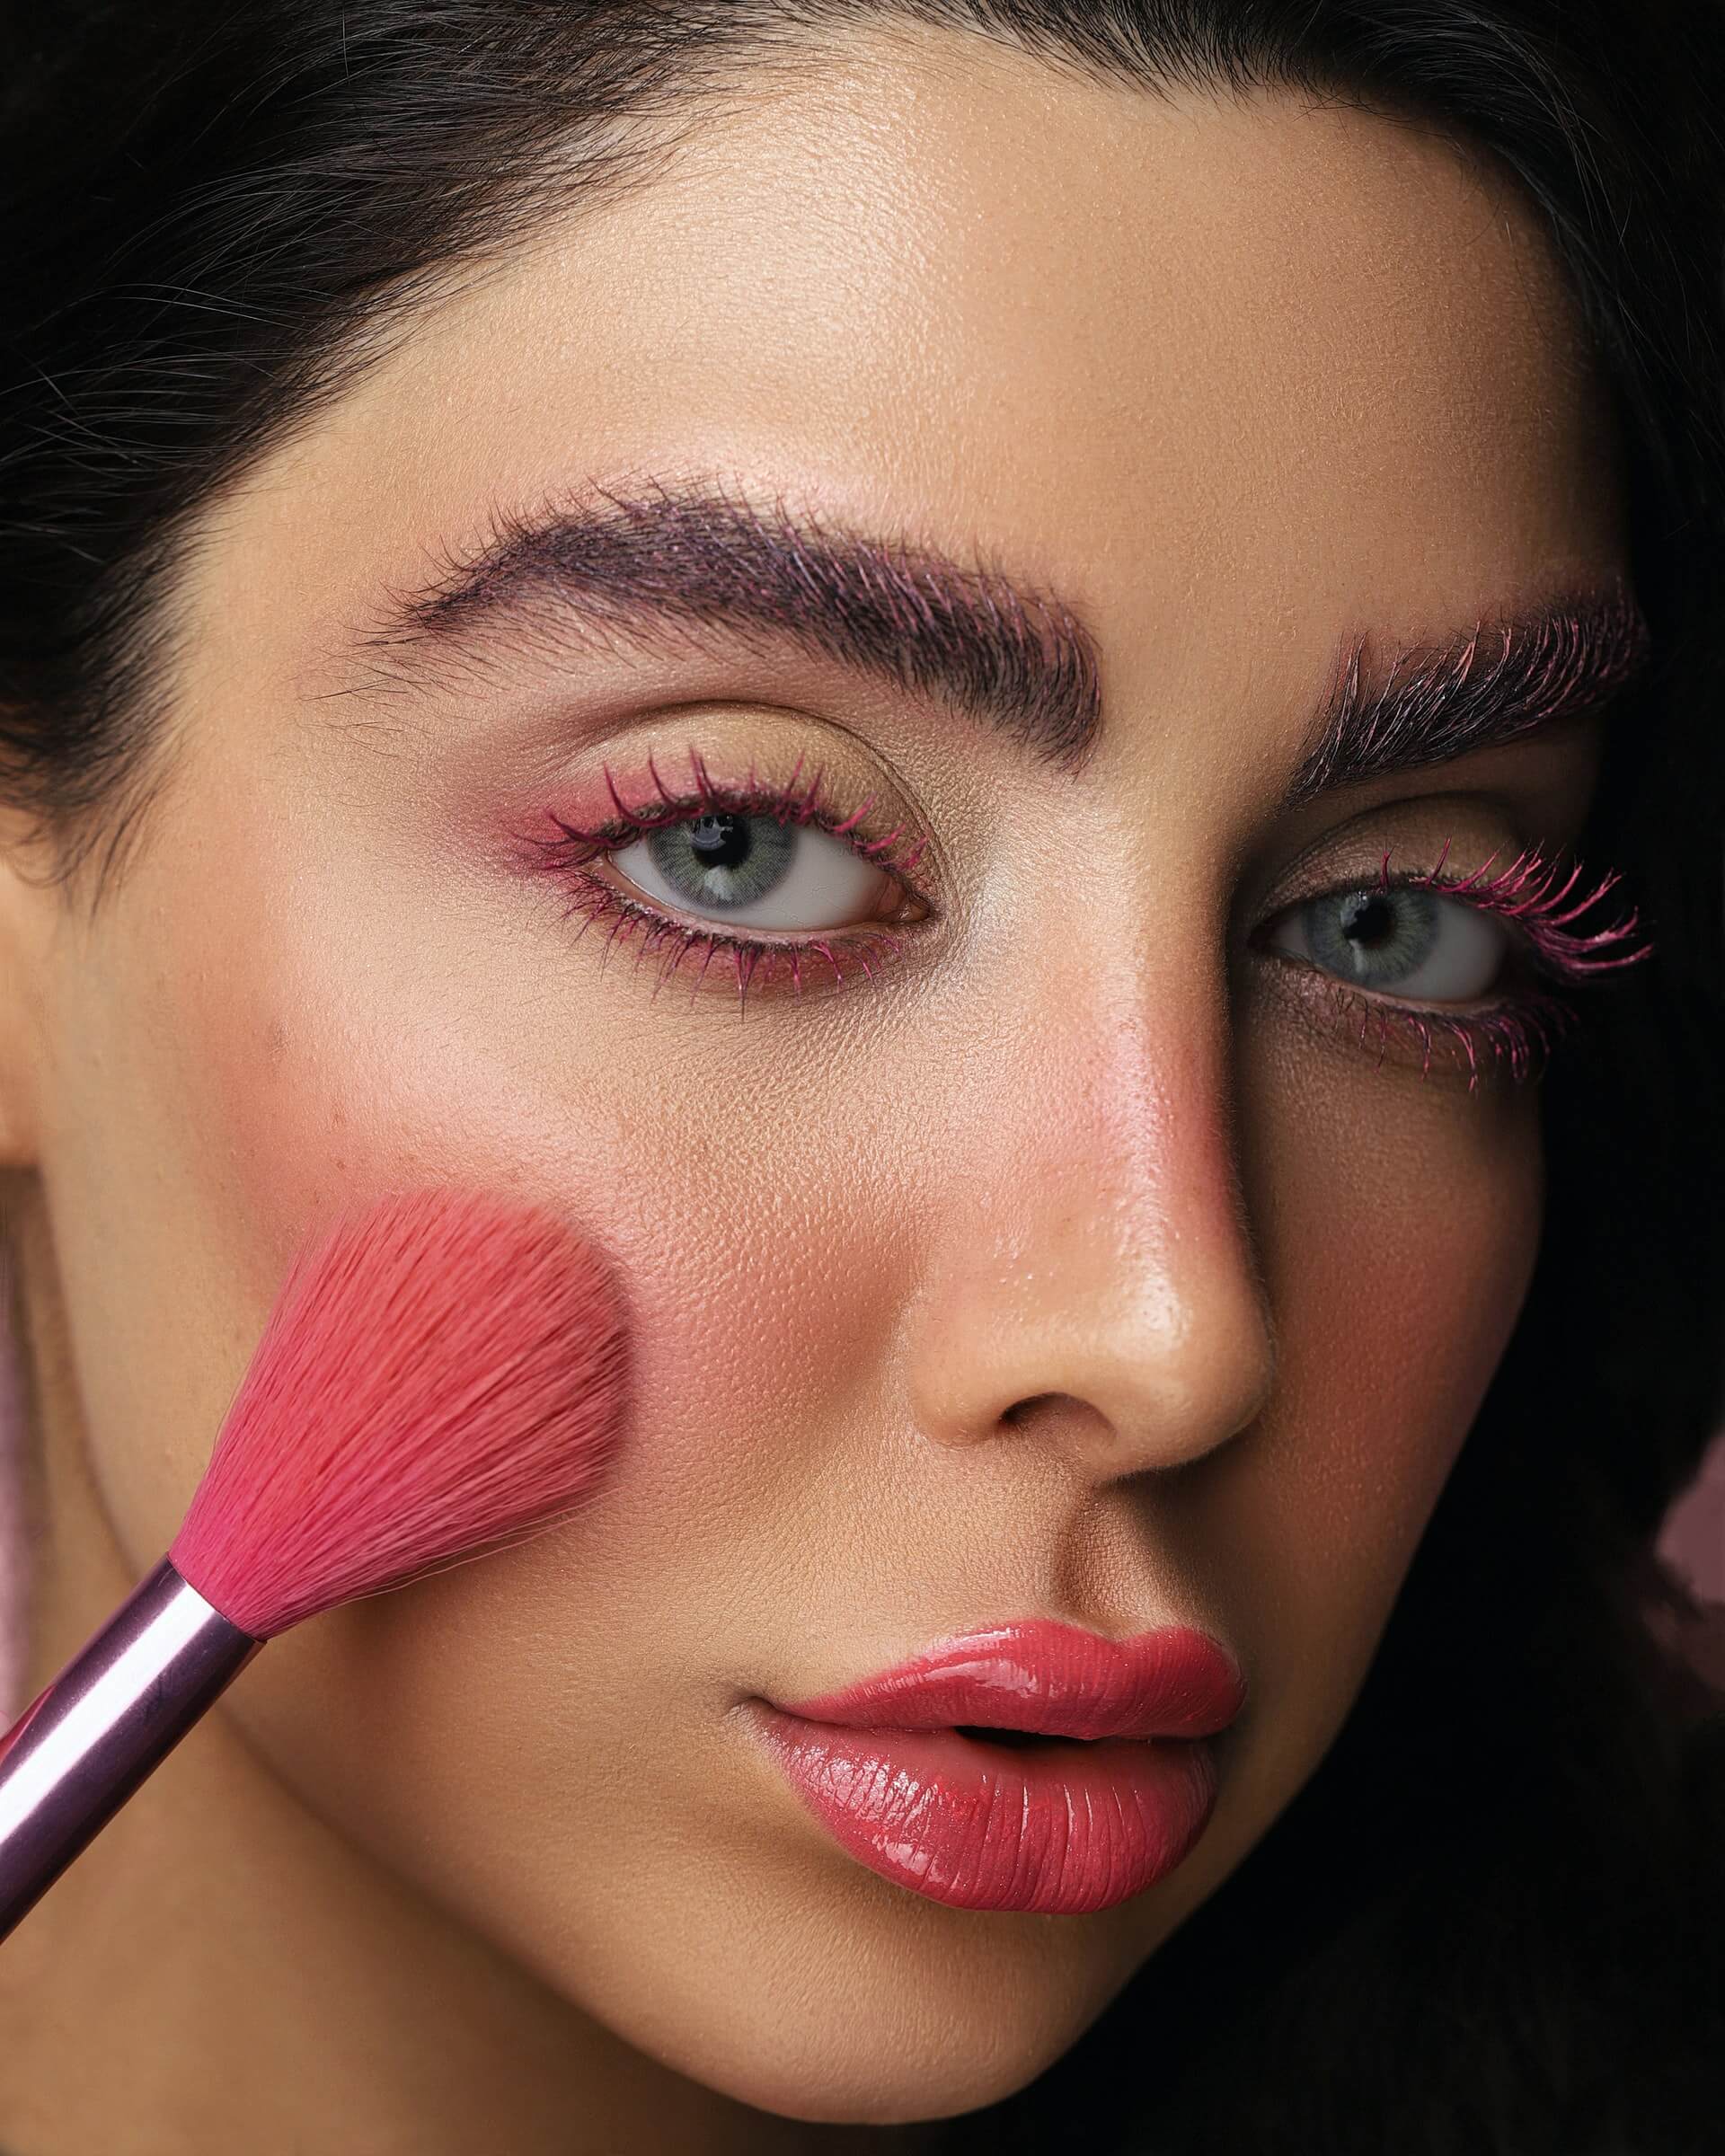 How can you rejuvenate yourself with blush?